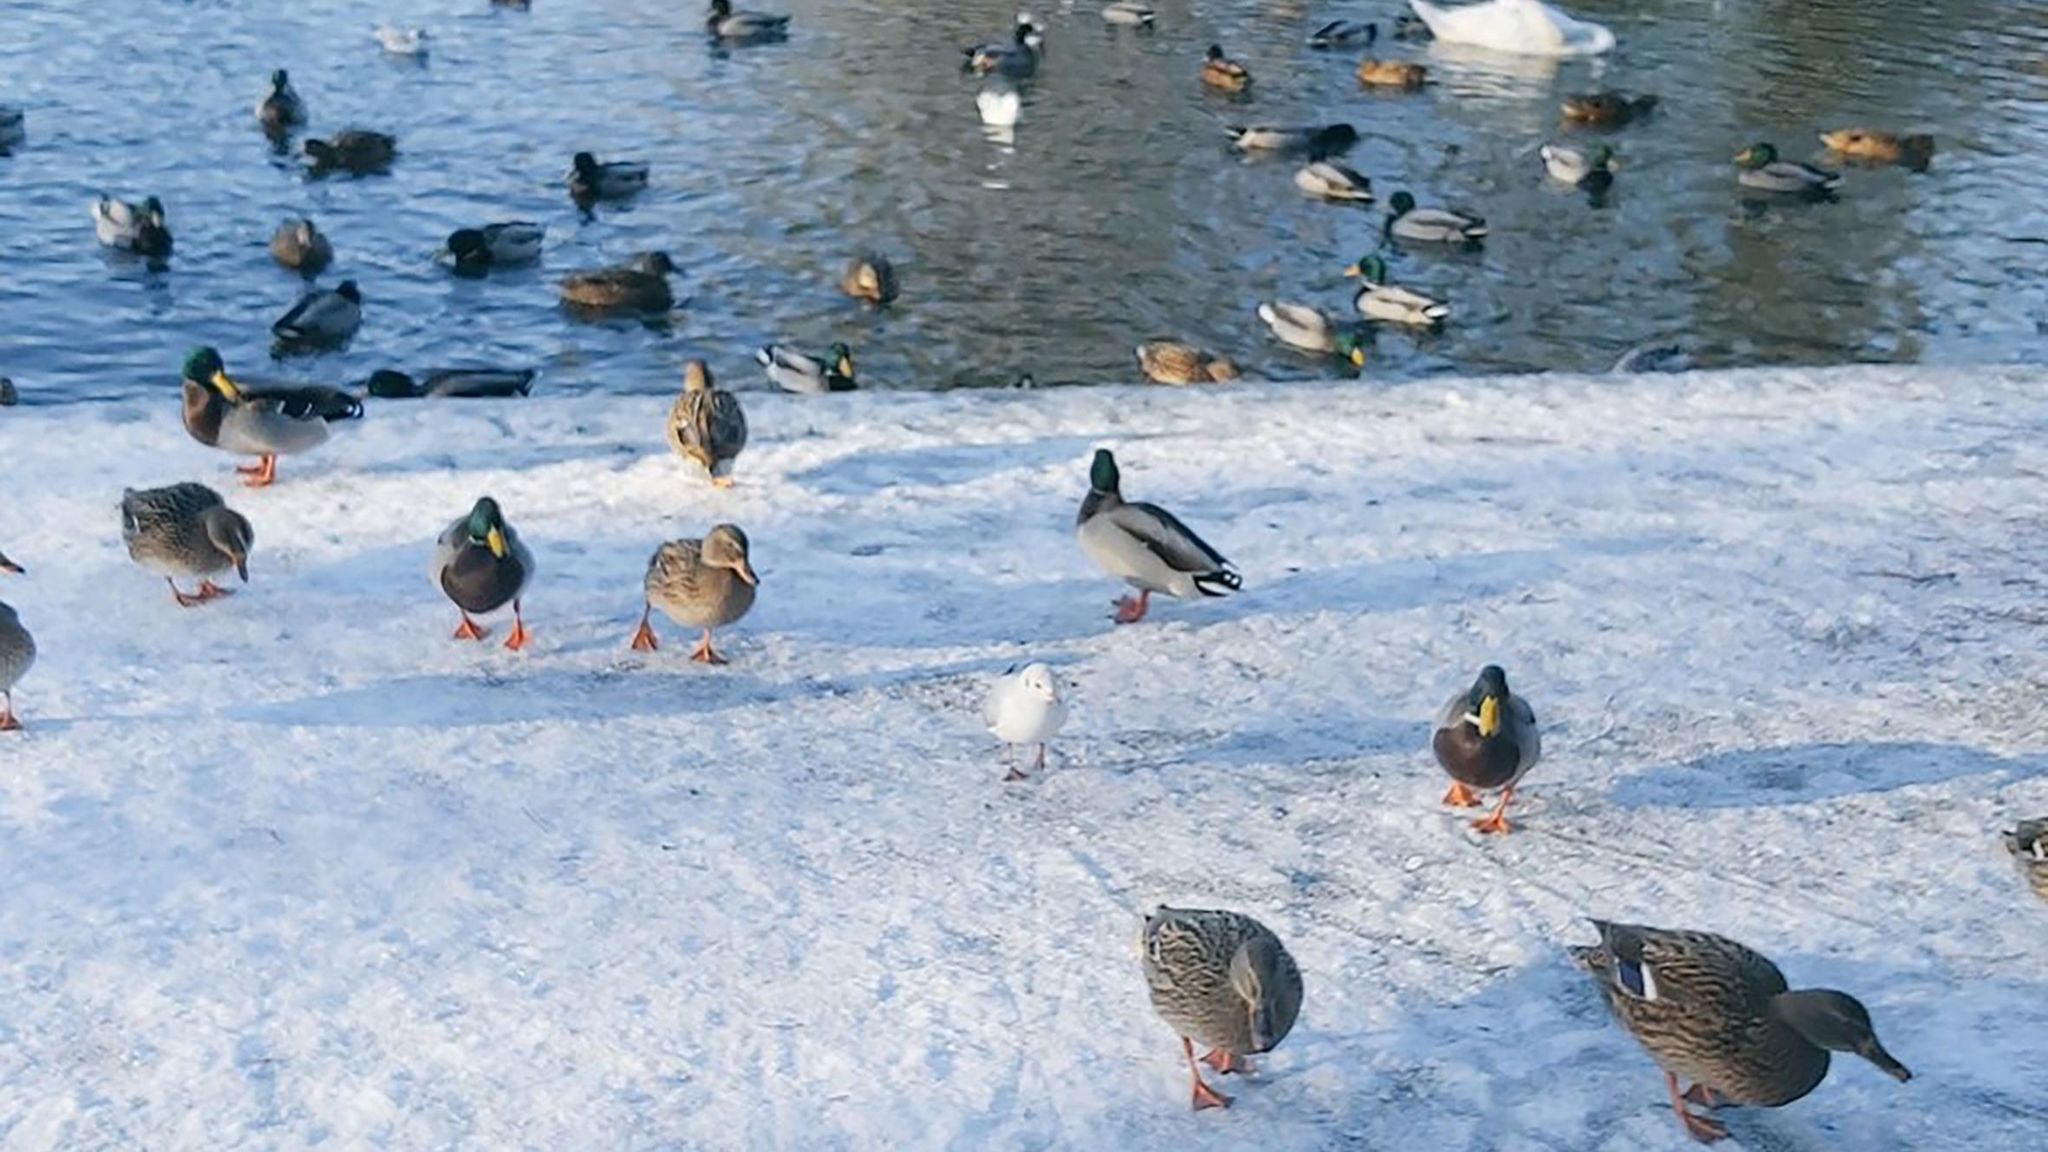 Ducks on the snow and ice